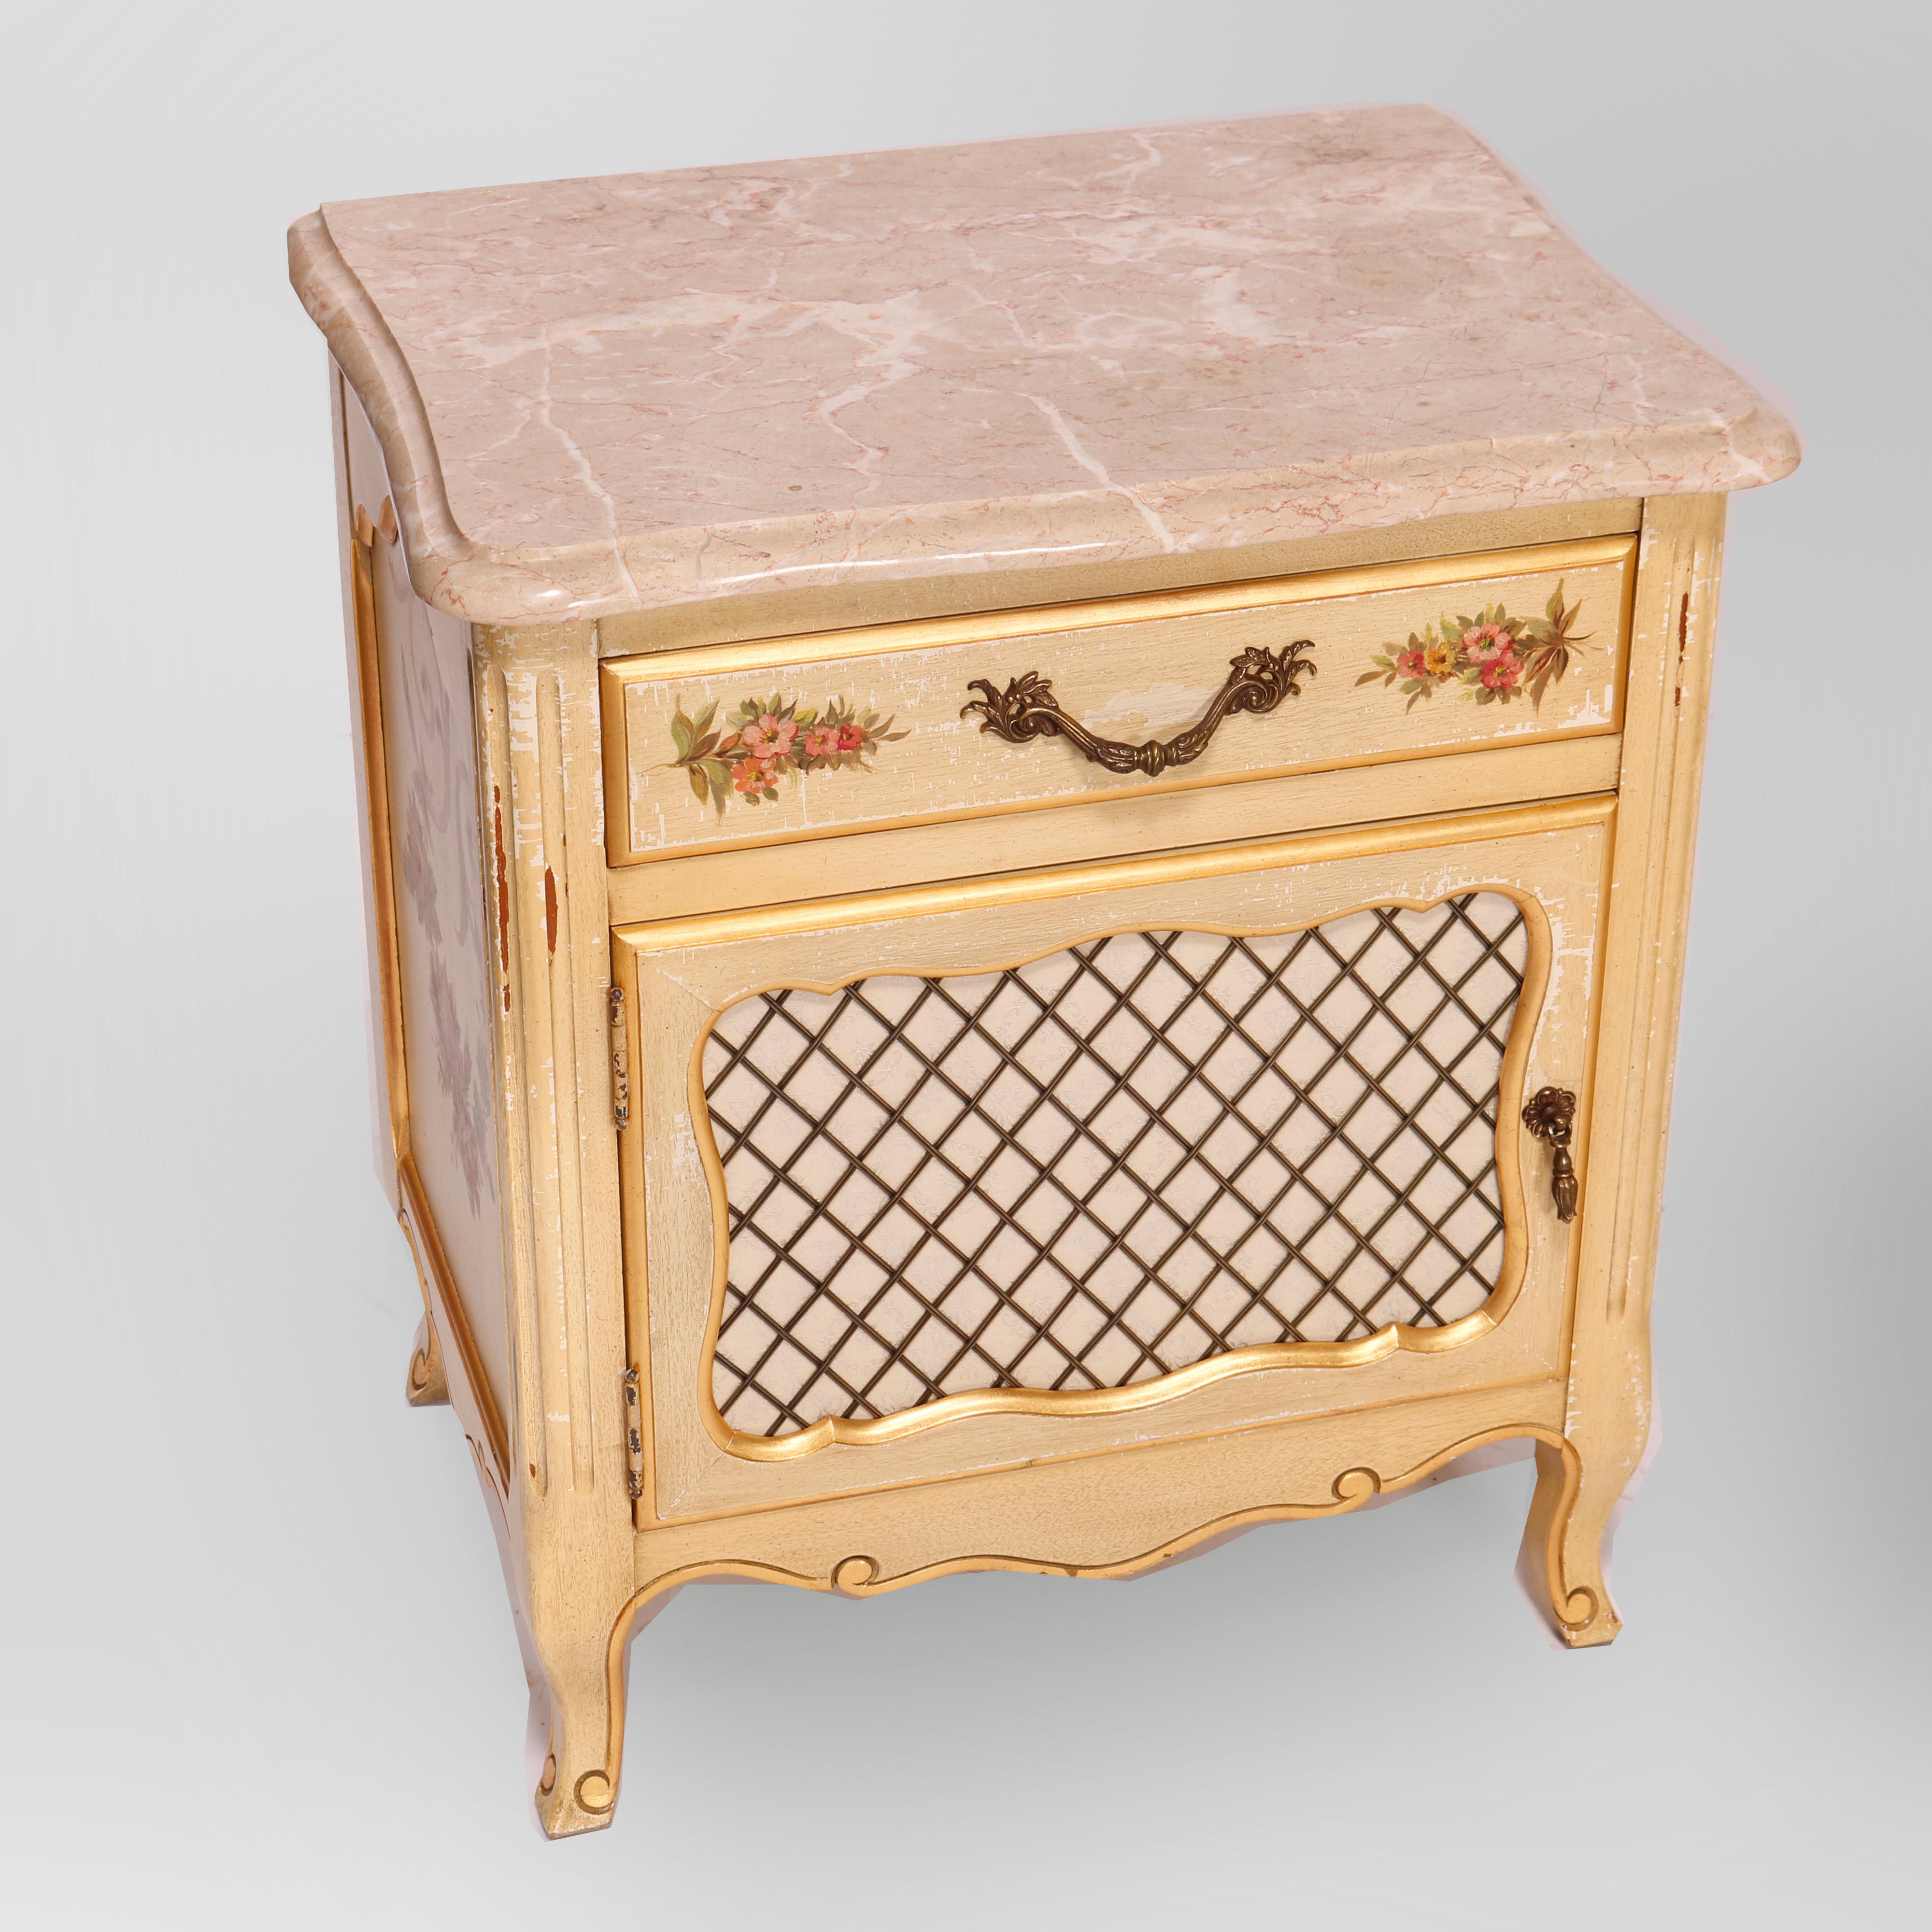 American French Provincial Style Polychrome, Gilt & Marble Stands by Kozak Studios 20thC For Sale